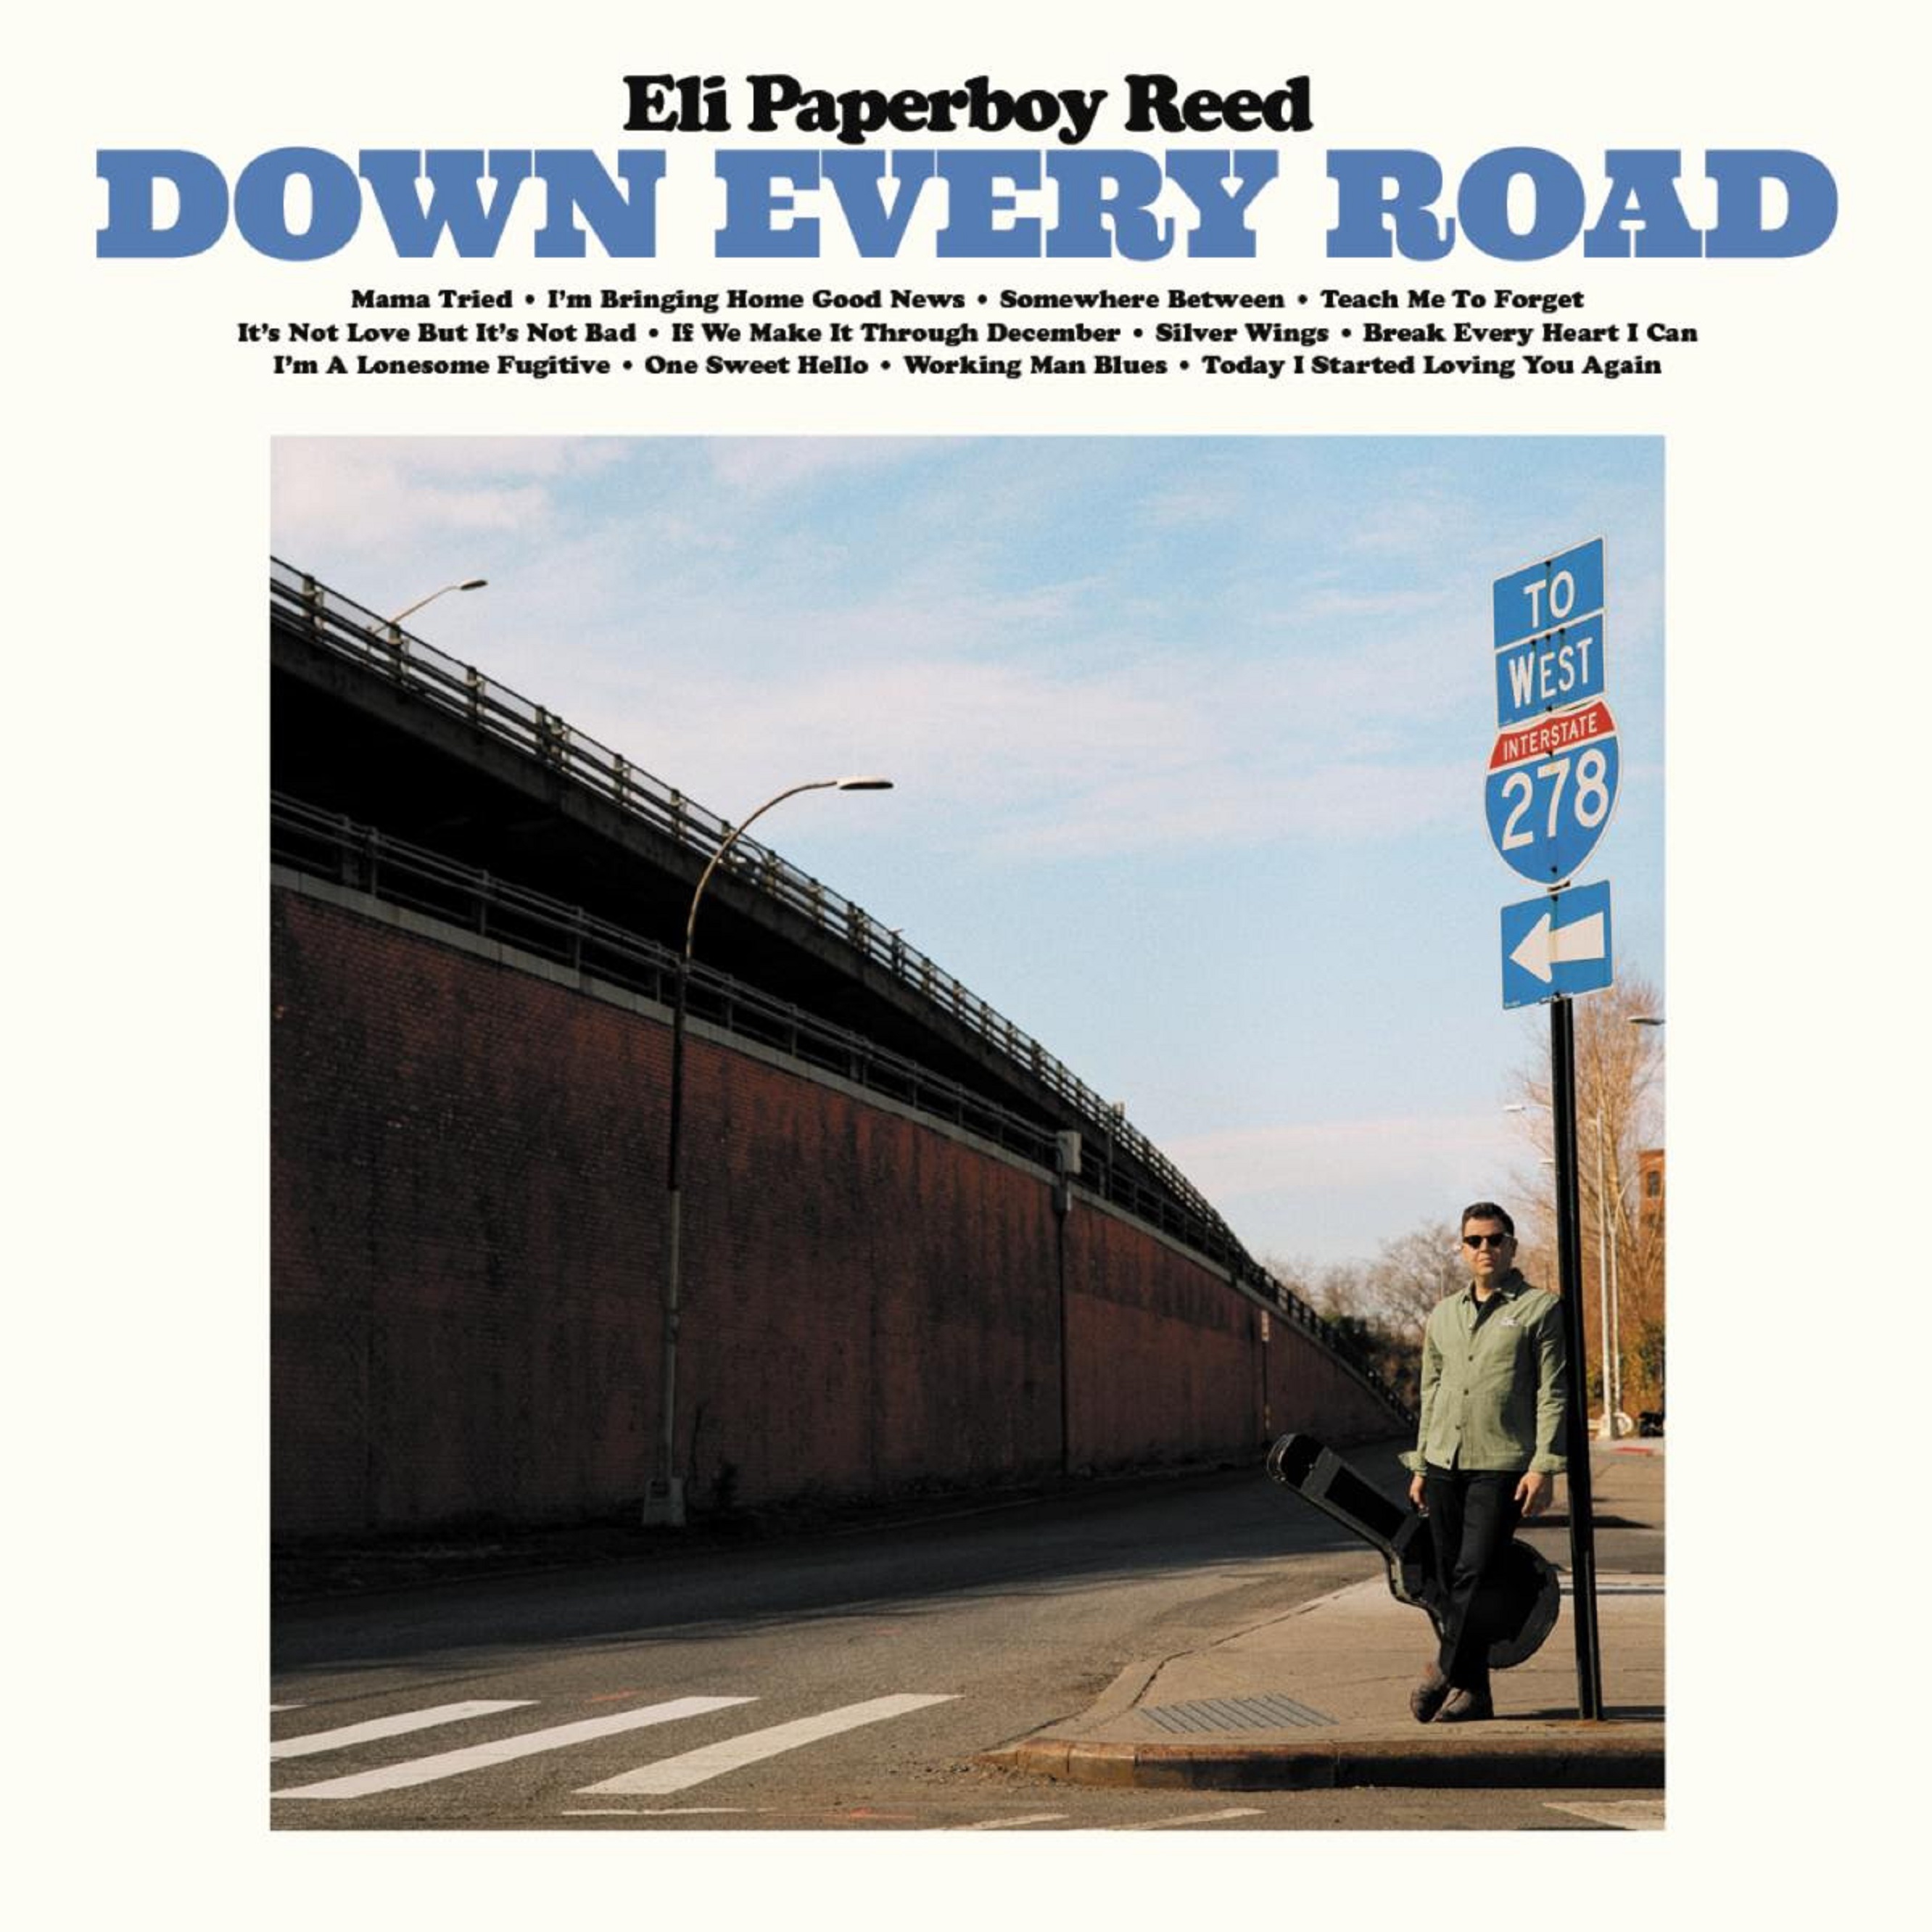 ELI PAPERBOY REED BRINGS THE SWEET SOUNDS OF SOUL MUSIC TO THE SONGBOOK OF MERLE HAGGARD